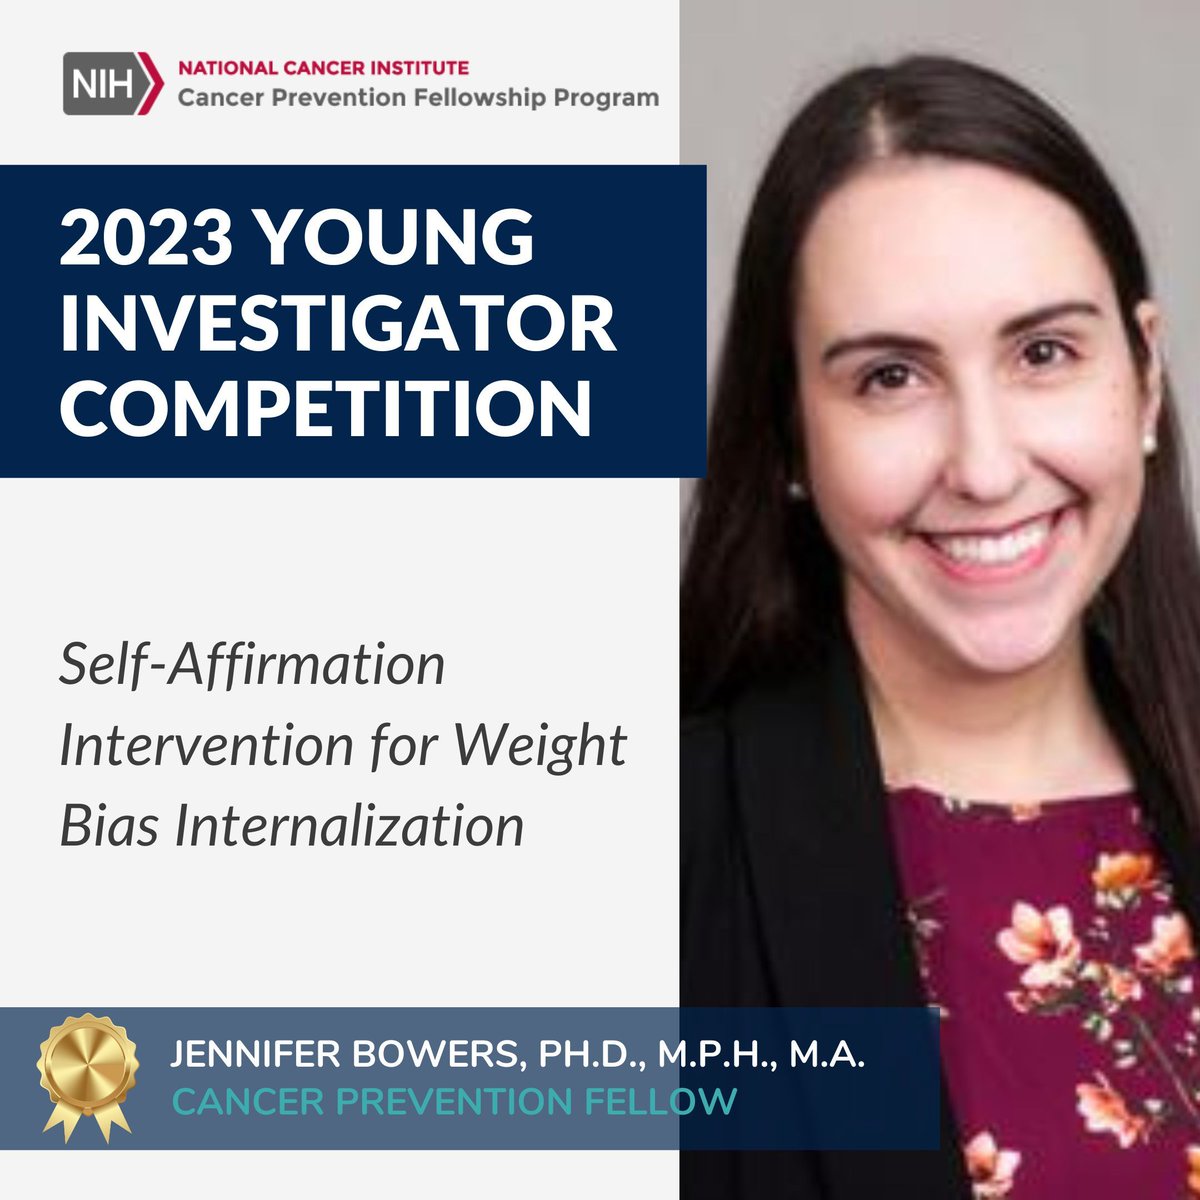 NCI Cancer Prevention Fellow @JenniferMBowers.received a 2023 Young Investigator Competition funding award from Time-sharing Experiments for the Social Sciences for her proposal, 'Self-Affirmation Intervention for Weight Bias Internalization.' More: buff.ly/3TmlhVp